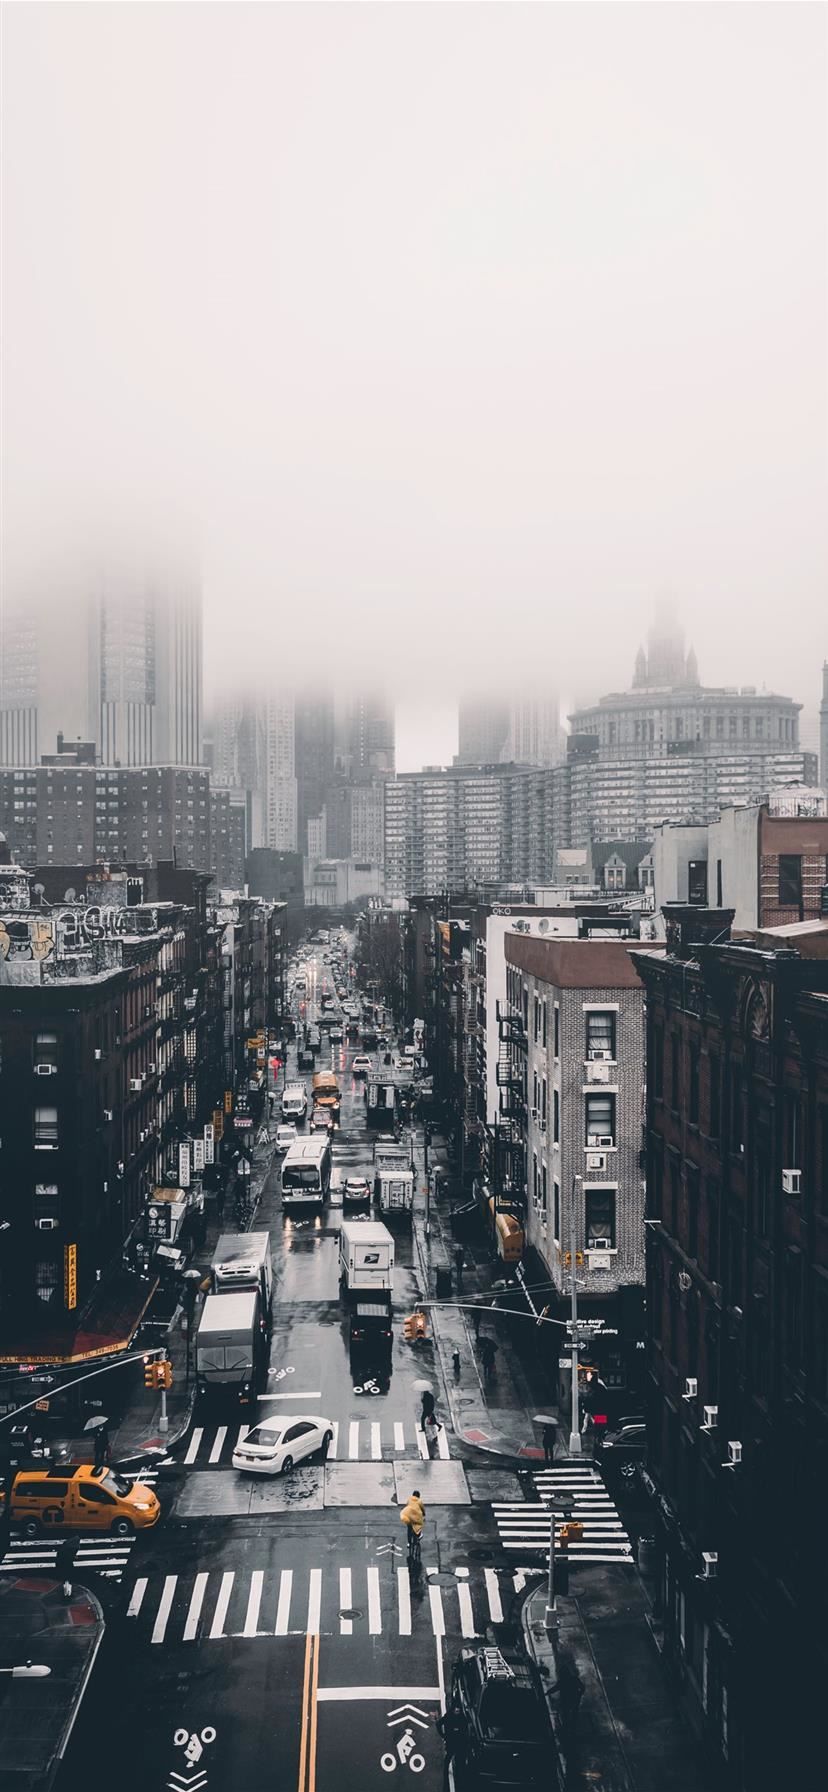 A city street with cars and buildings - Fog, city